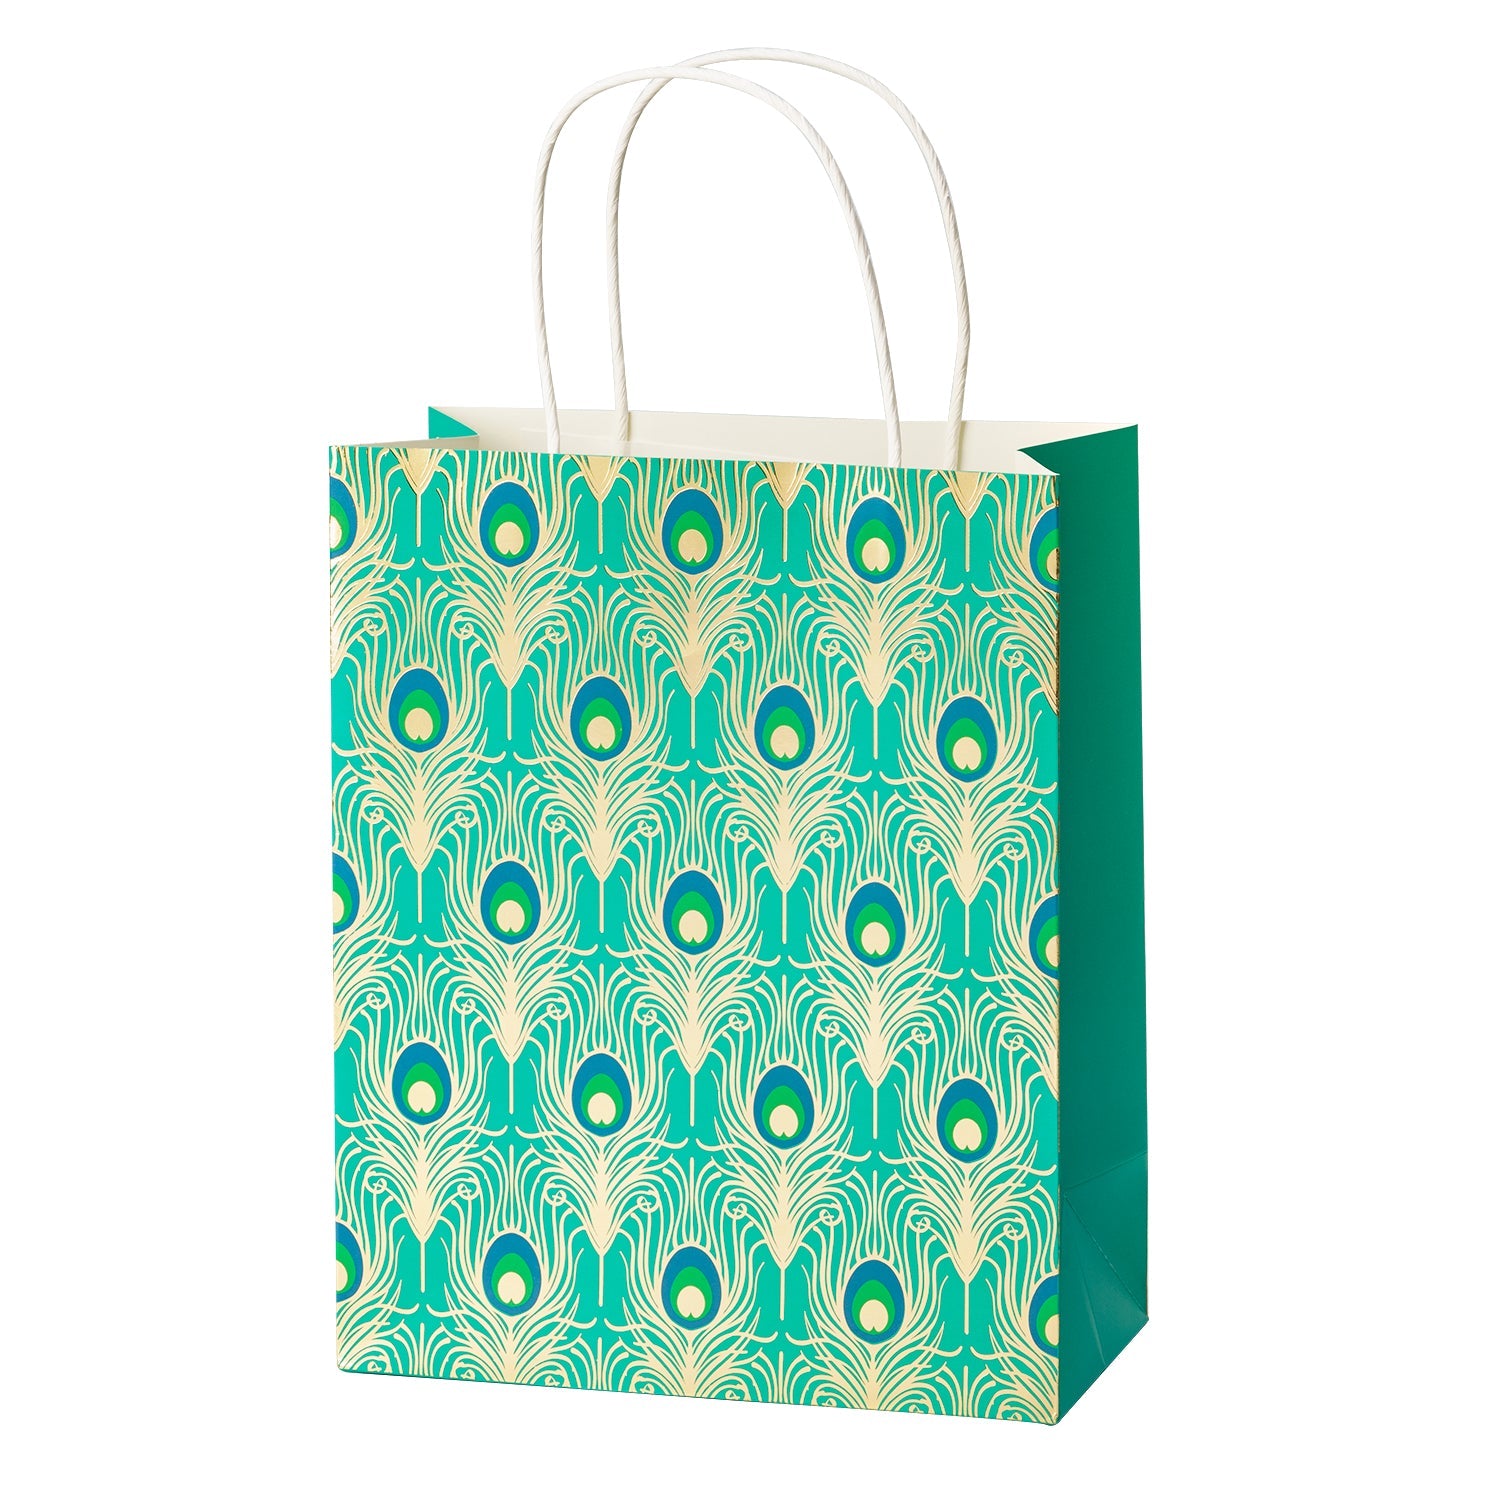 Peacock Medium Size Gift Bags 12 Pack 8"x4"x10"-Teal with Tissue